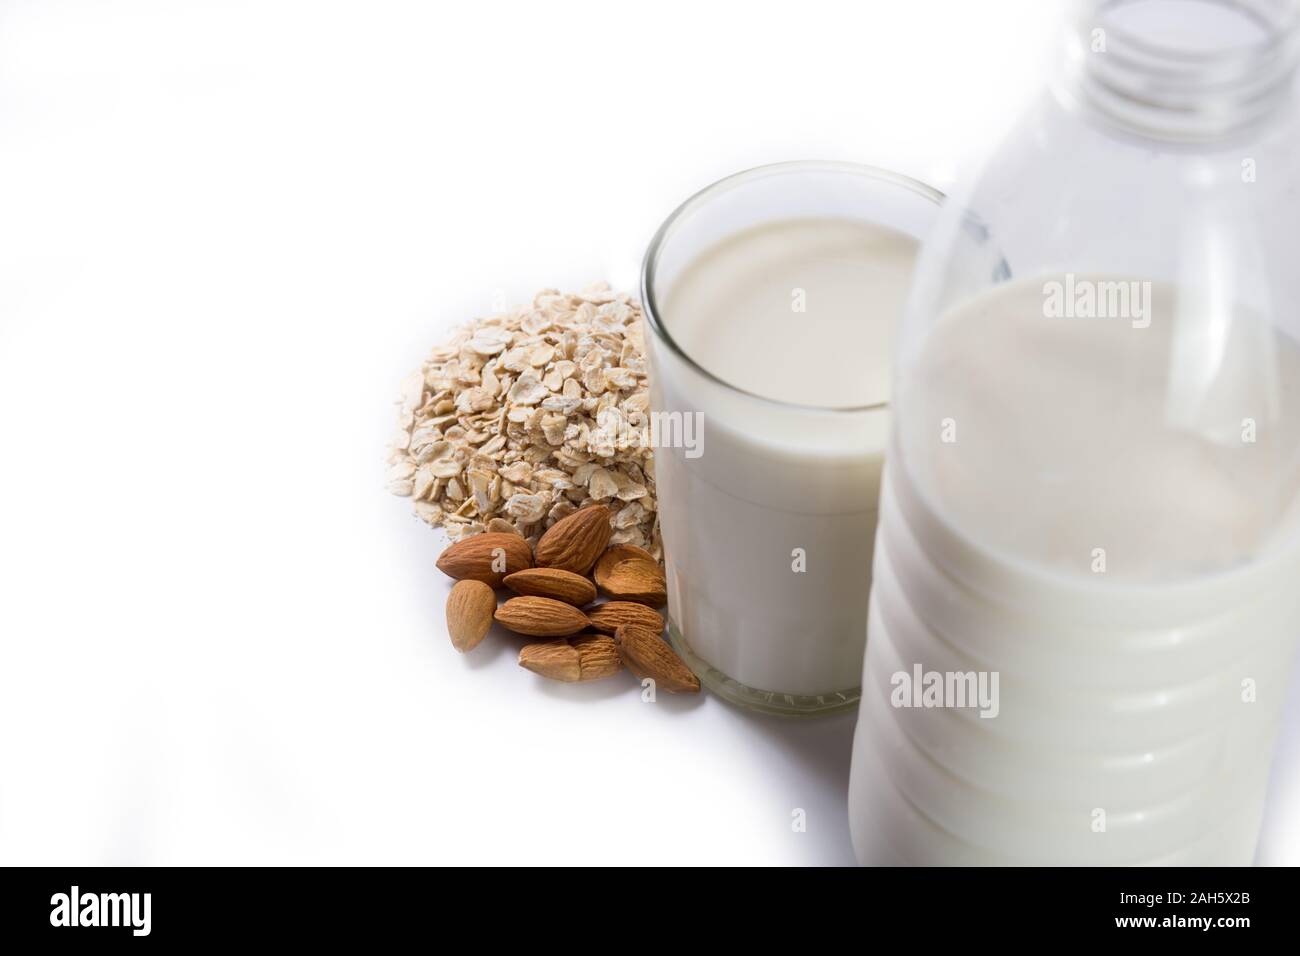 vegan milk made of oat and almong on a botttle andd in a glass, on a white backgorund Stock Photo